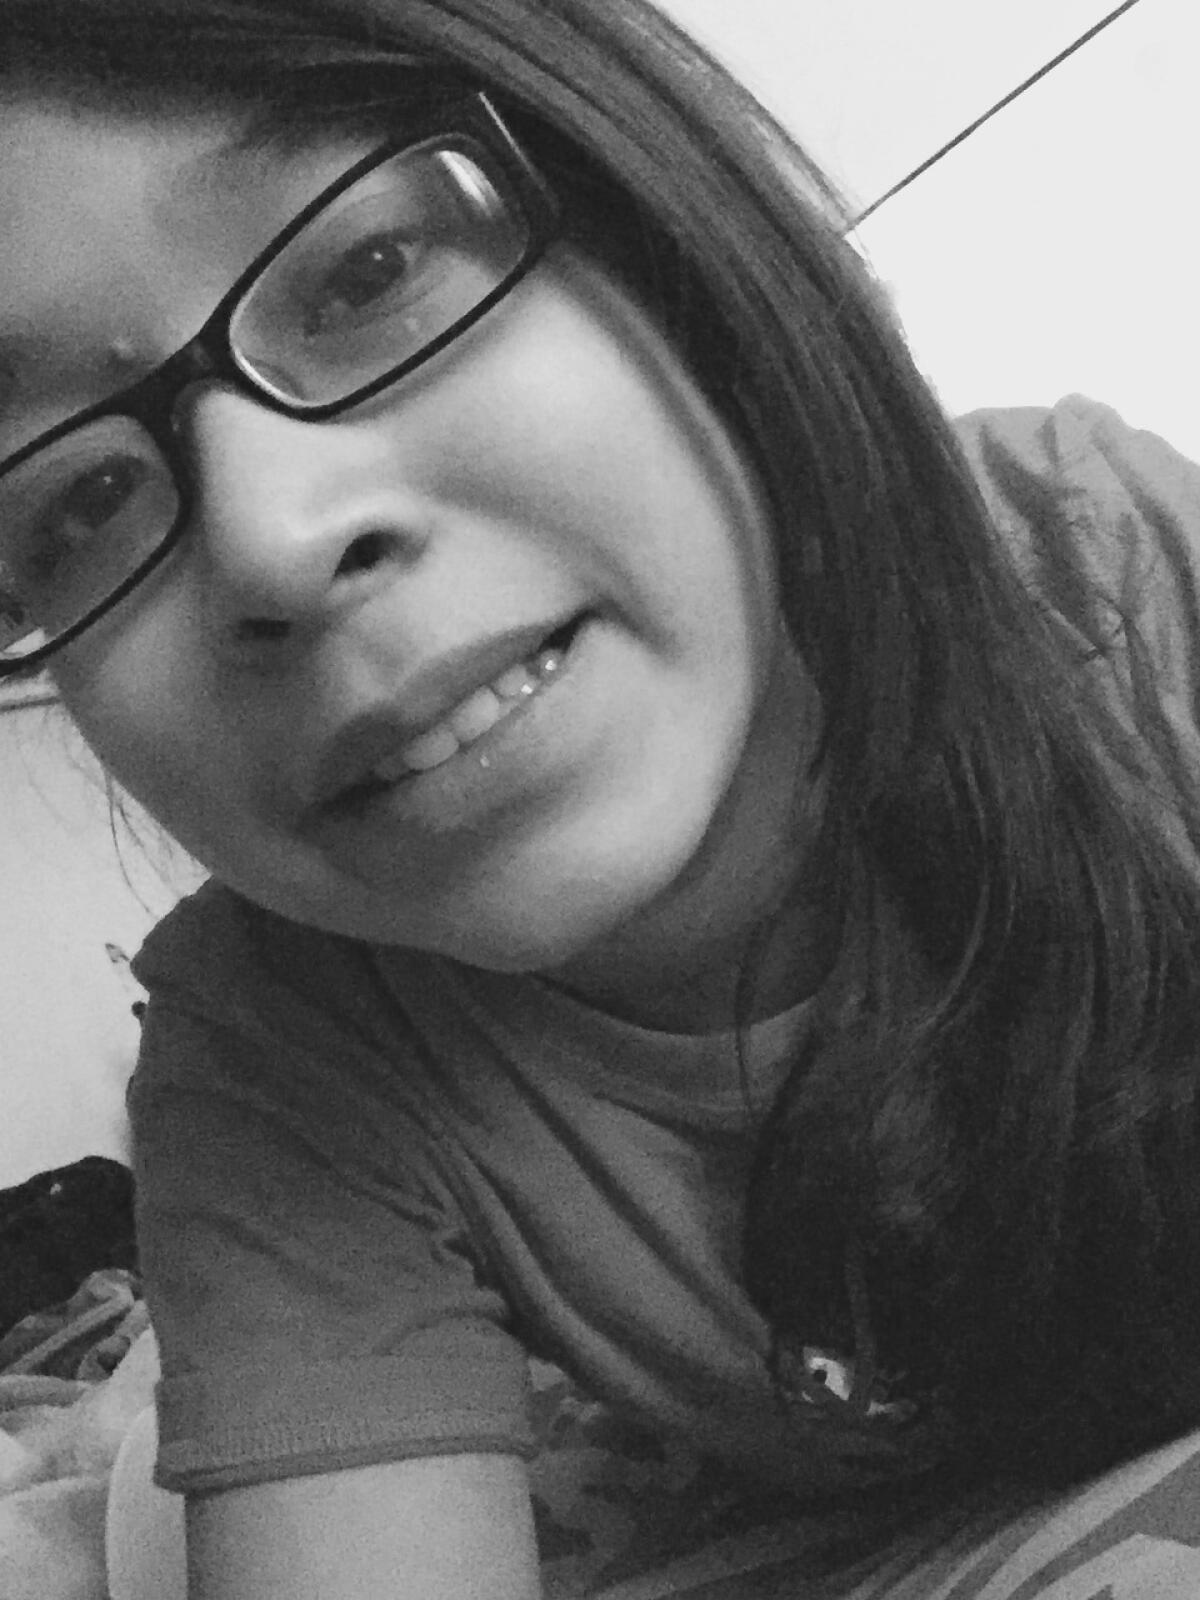 A selfie of Henny Scott, a 14-year-old Indigenous girl who went missing in 2018.